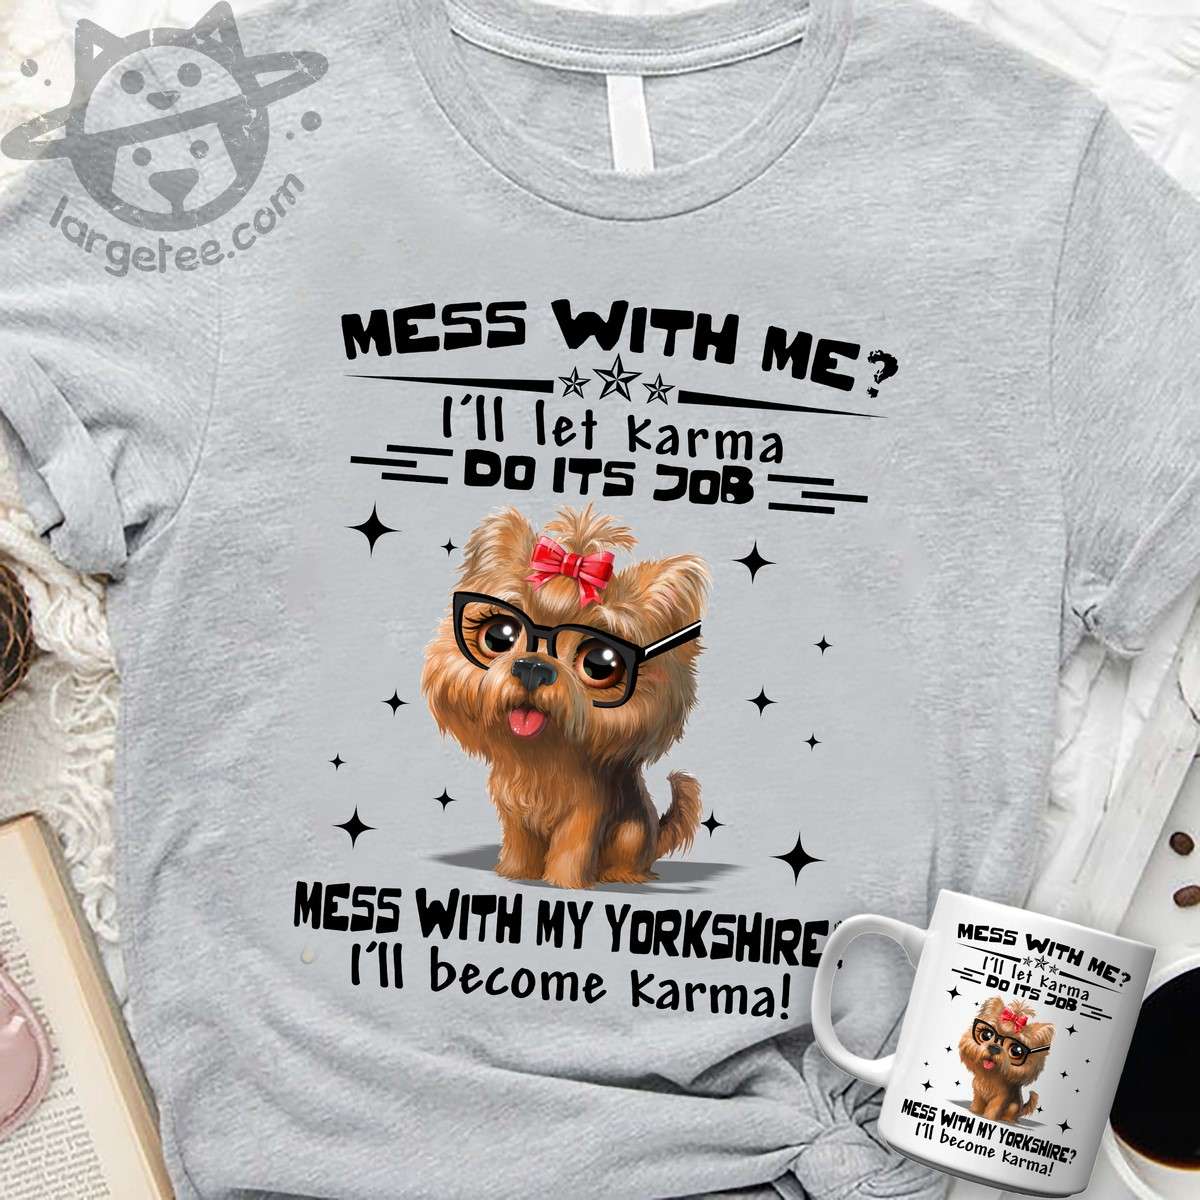 Pet Yorshire - Mess with me? I'll let karma do its job mess with my yorkshire i'll become karma